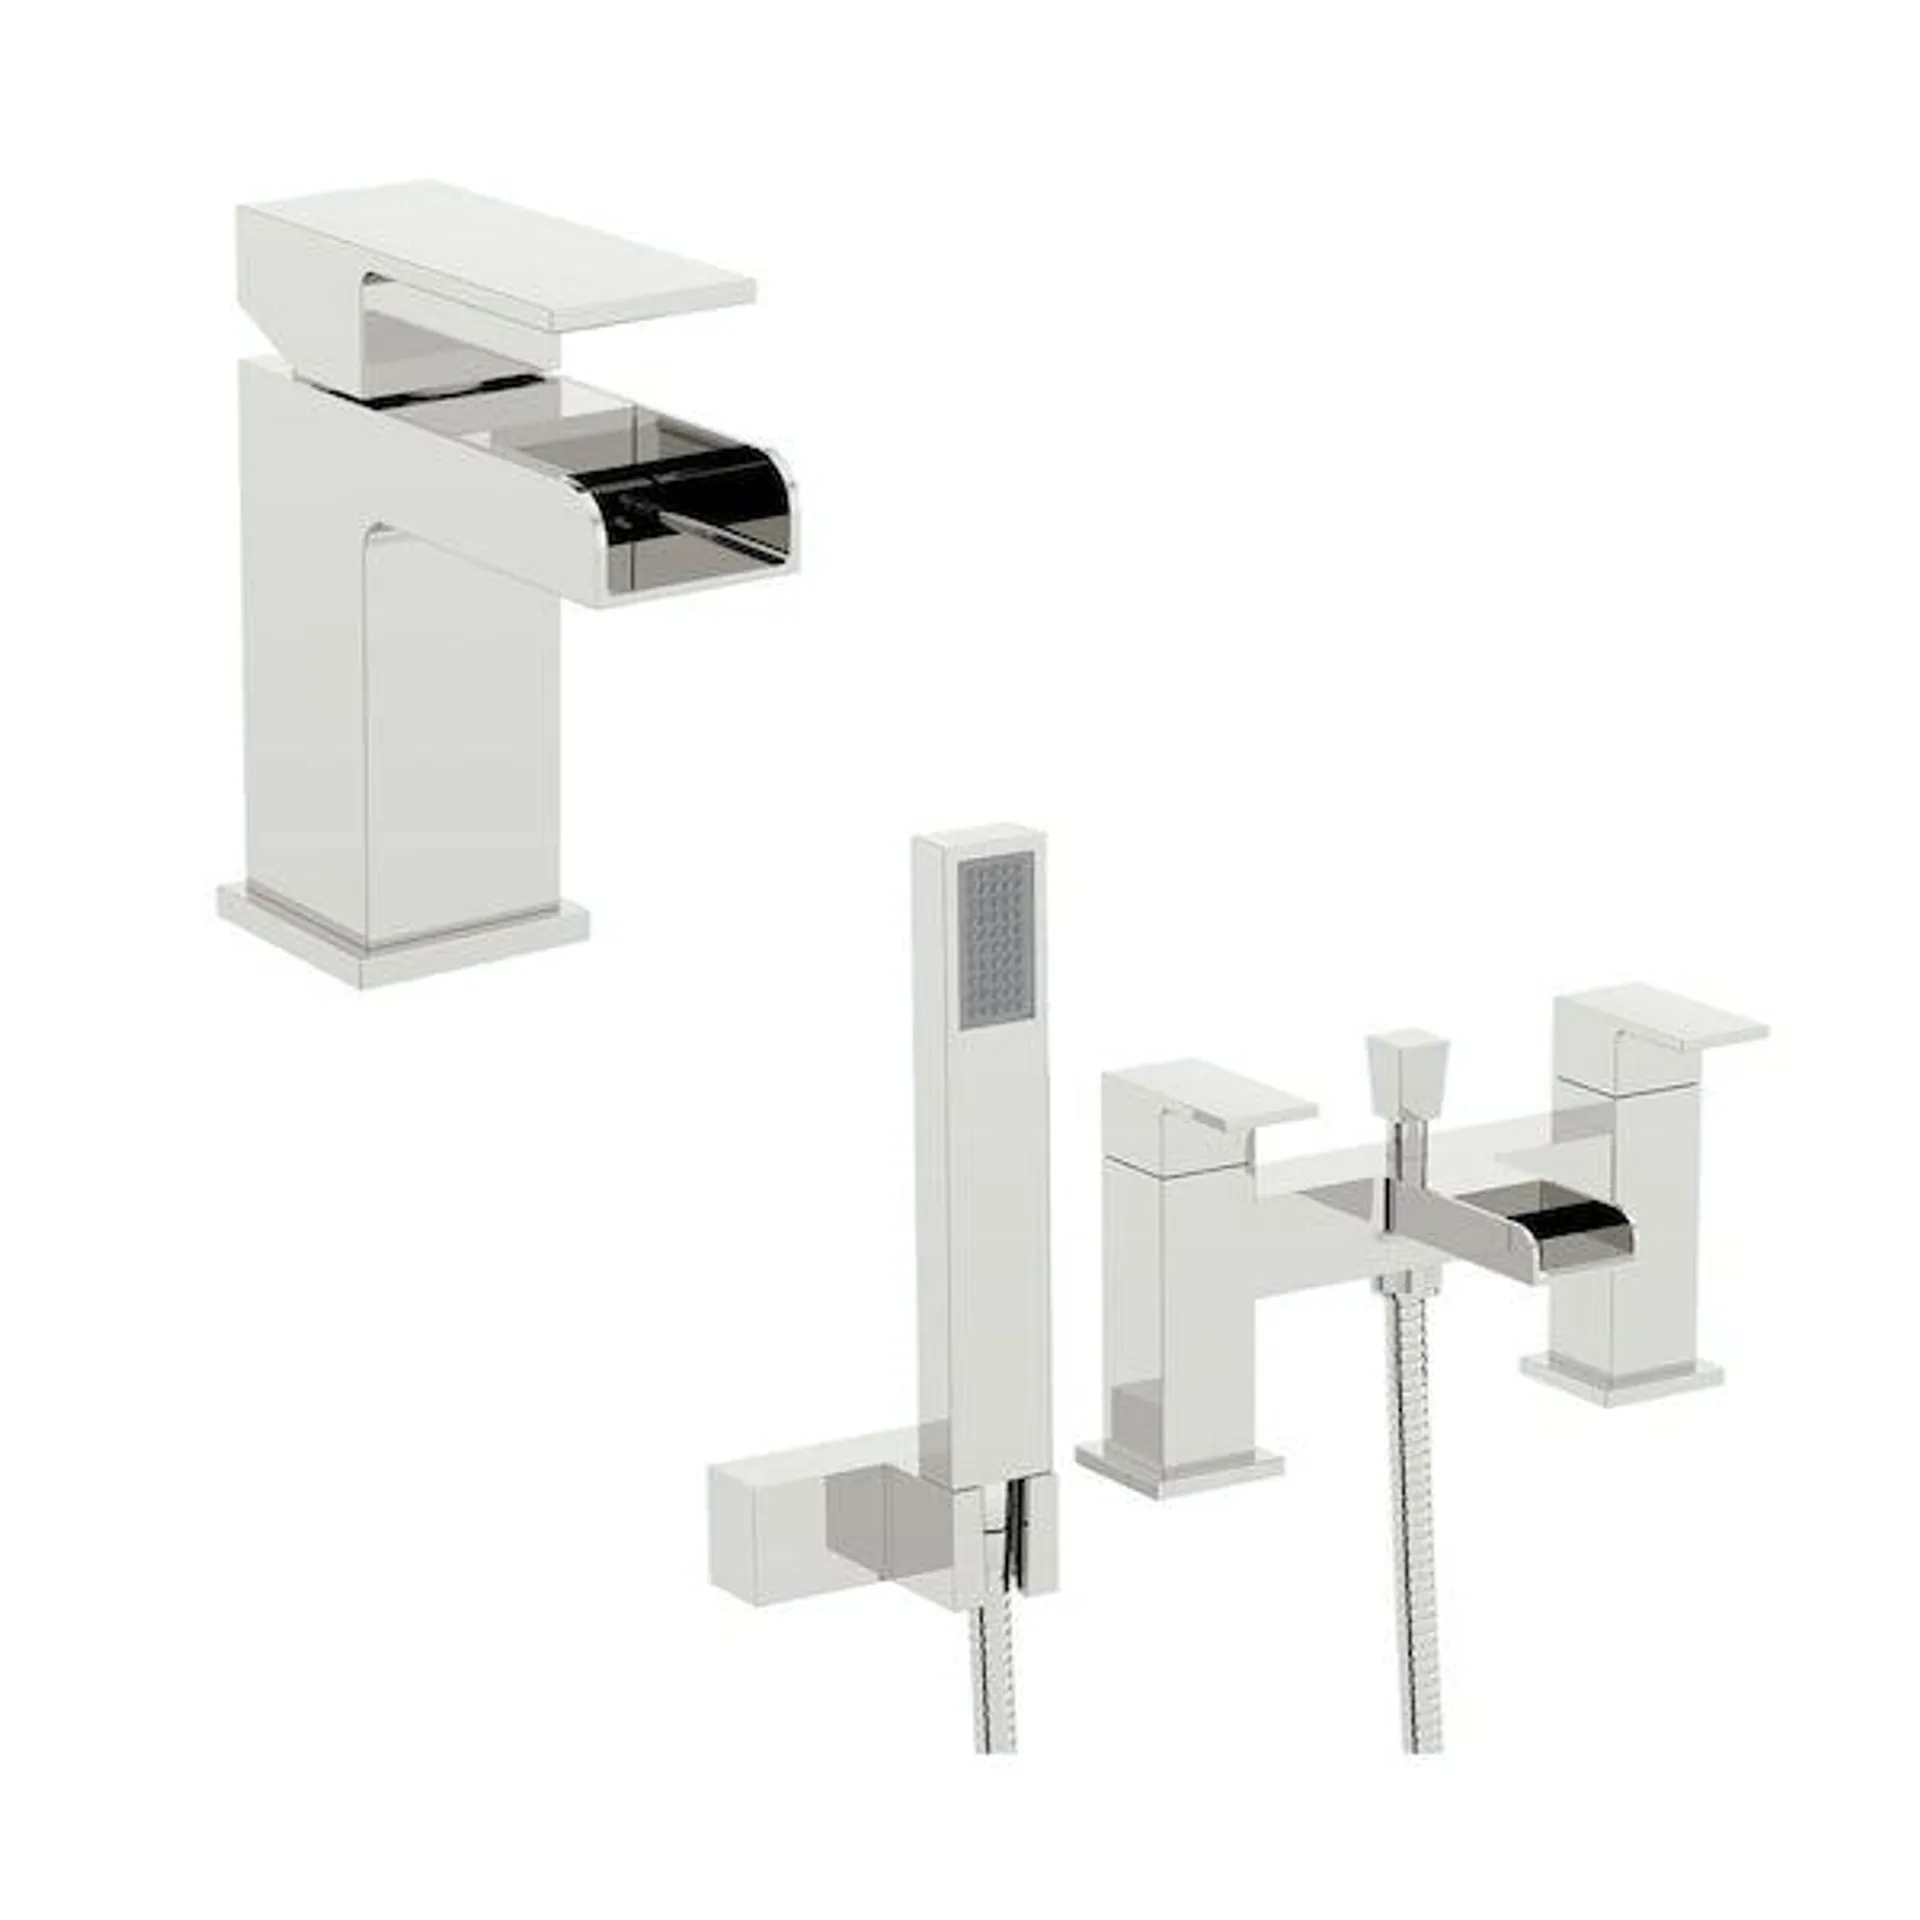 Orchard Derwent waterfall basin and bath shower mixer pack